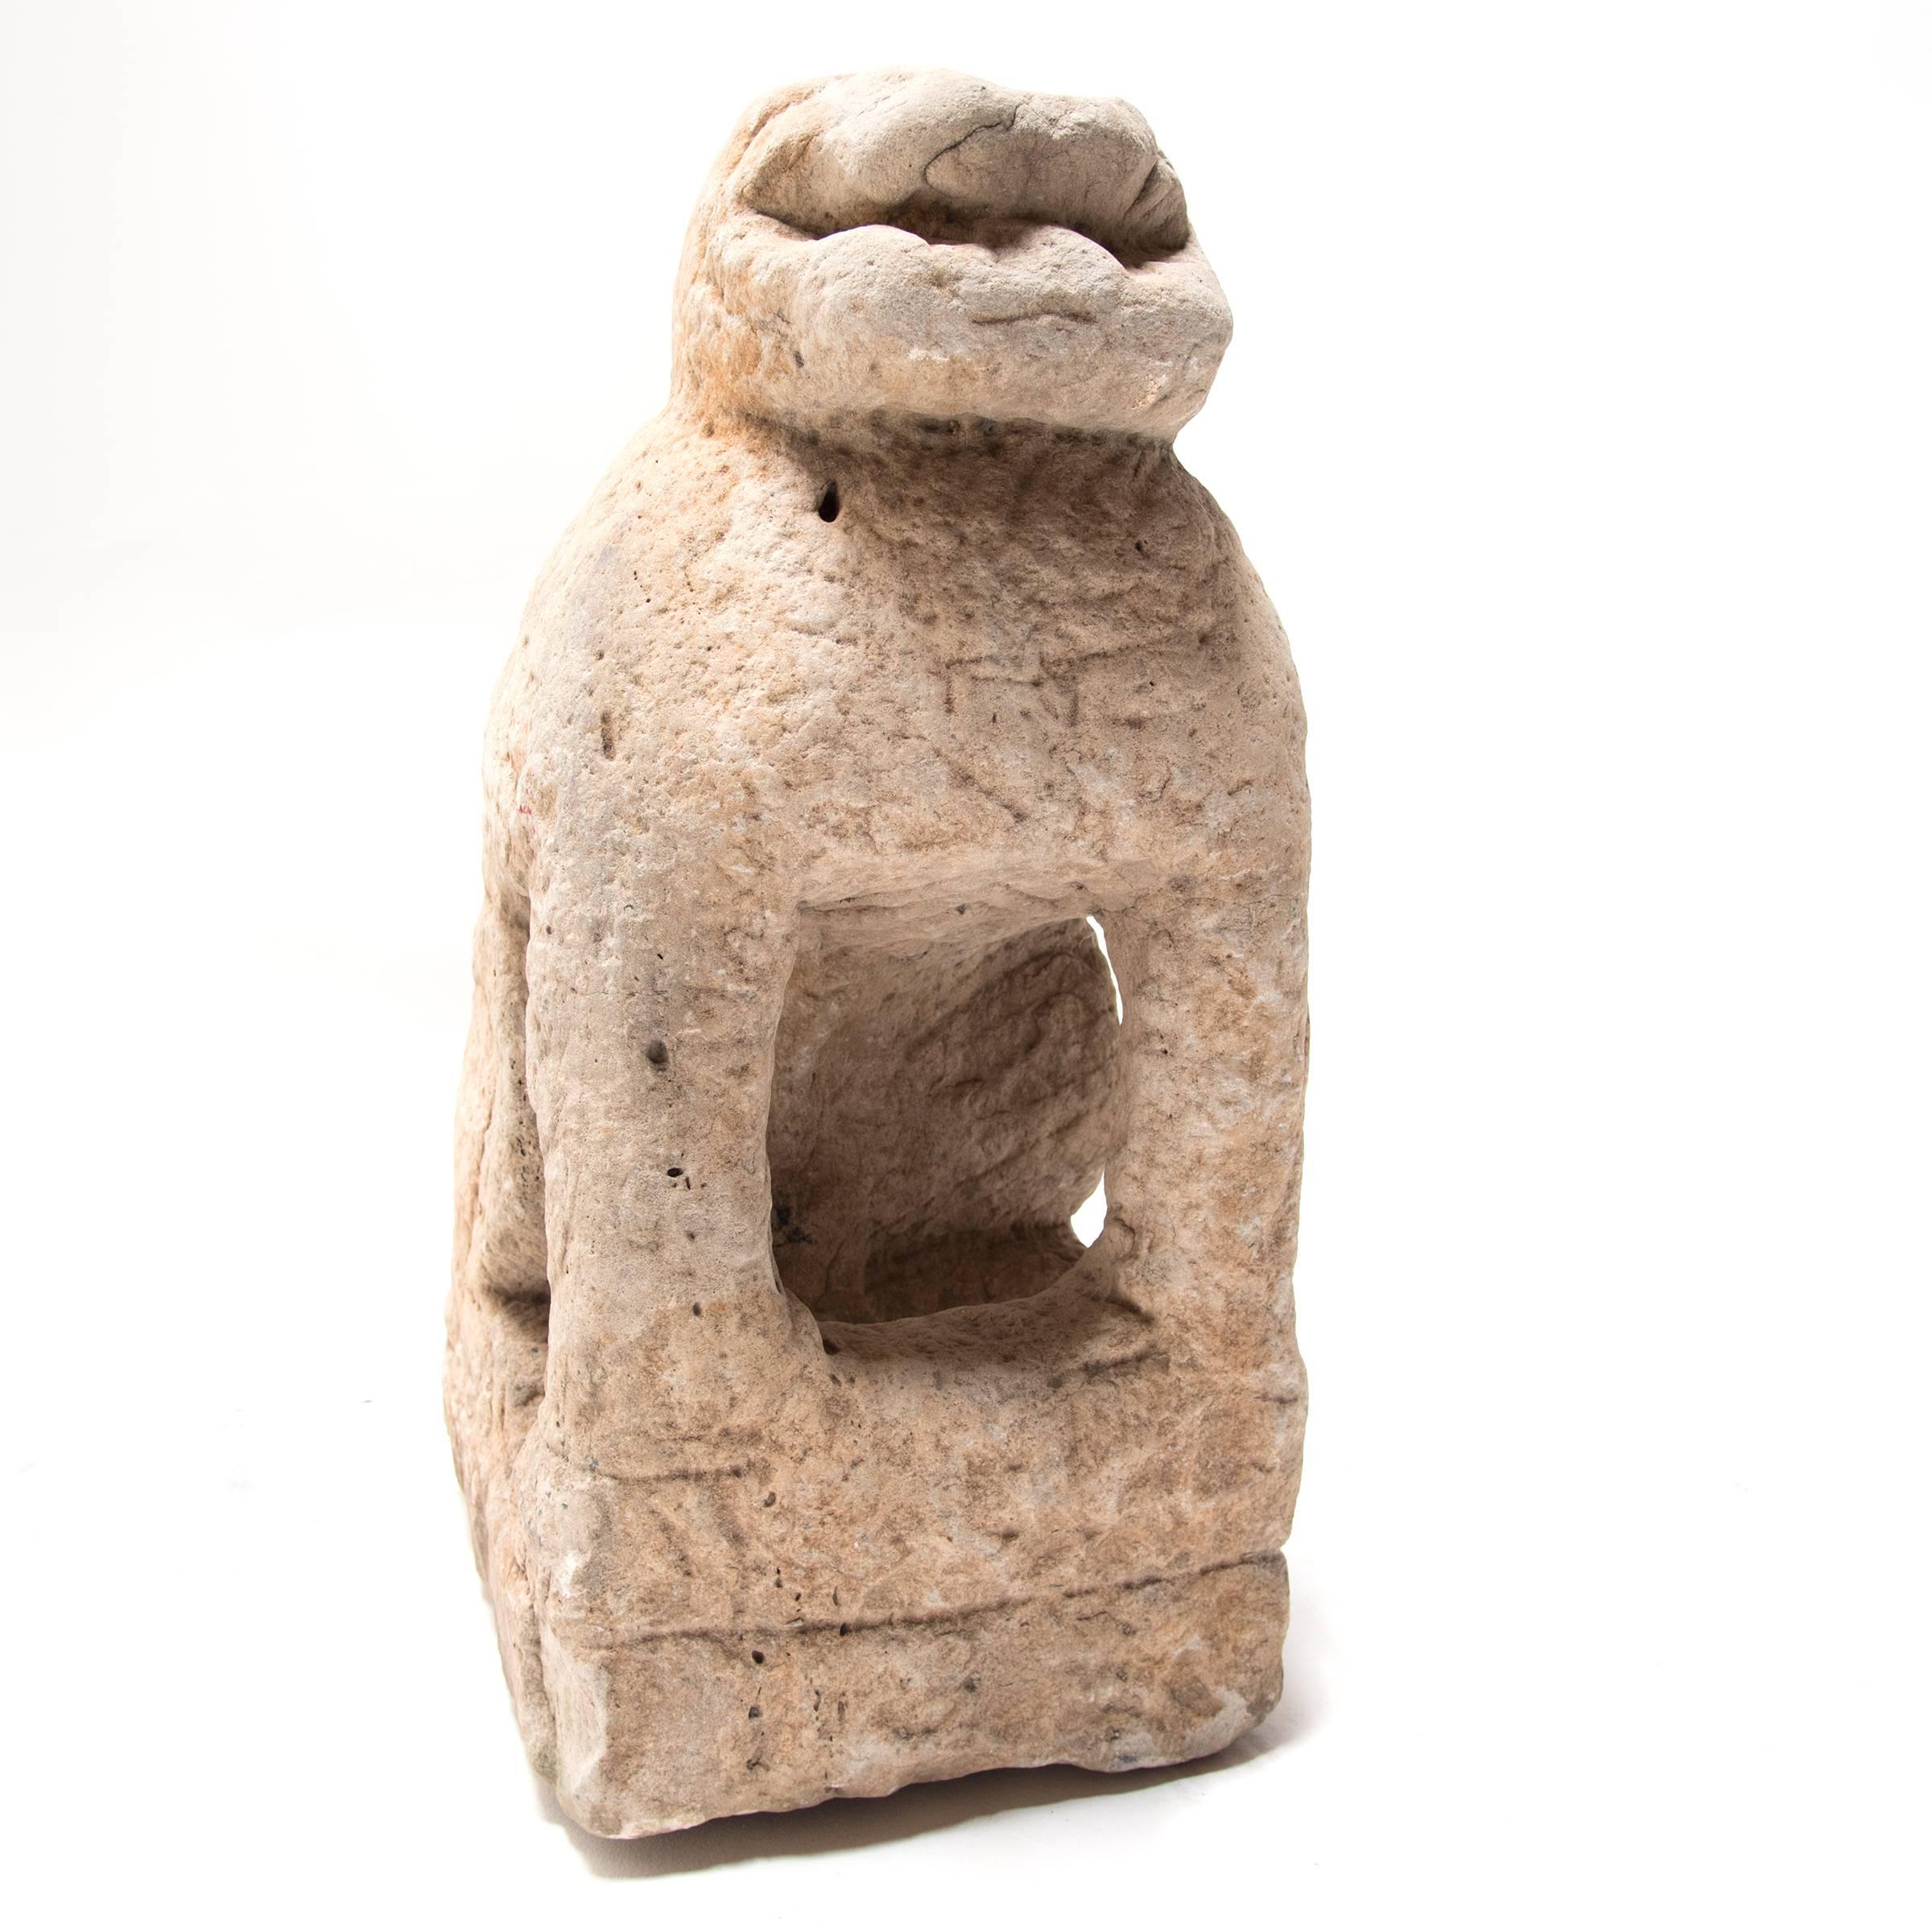 This seated sculpture was carved over 400 years ago during the Ming dynasty out of a single block of limestone. It was discovered in the Shanxi region of China and is believed to represent a seated lion, a protector, well worn by time. The history